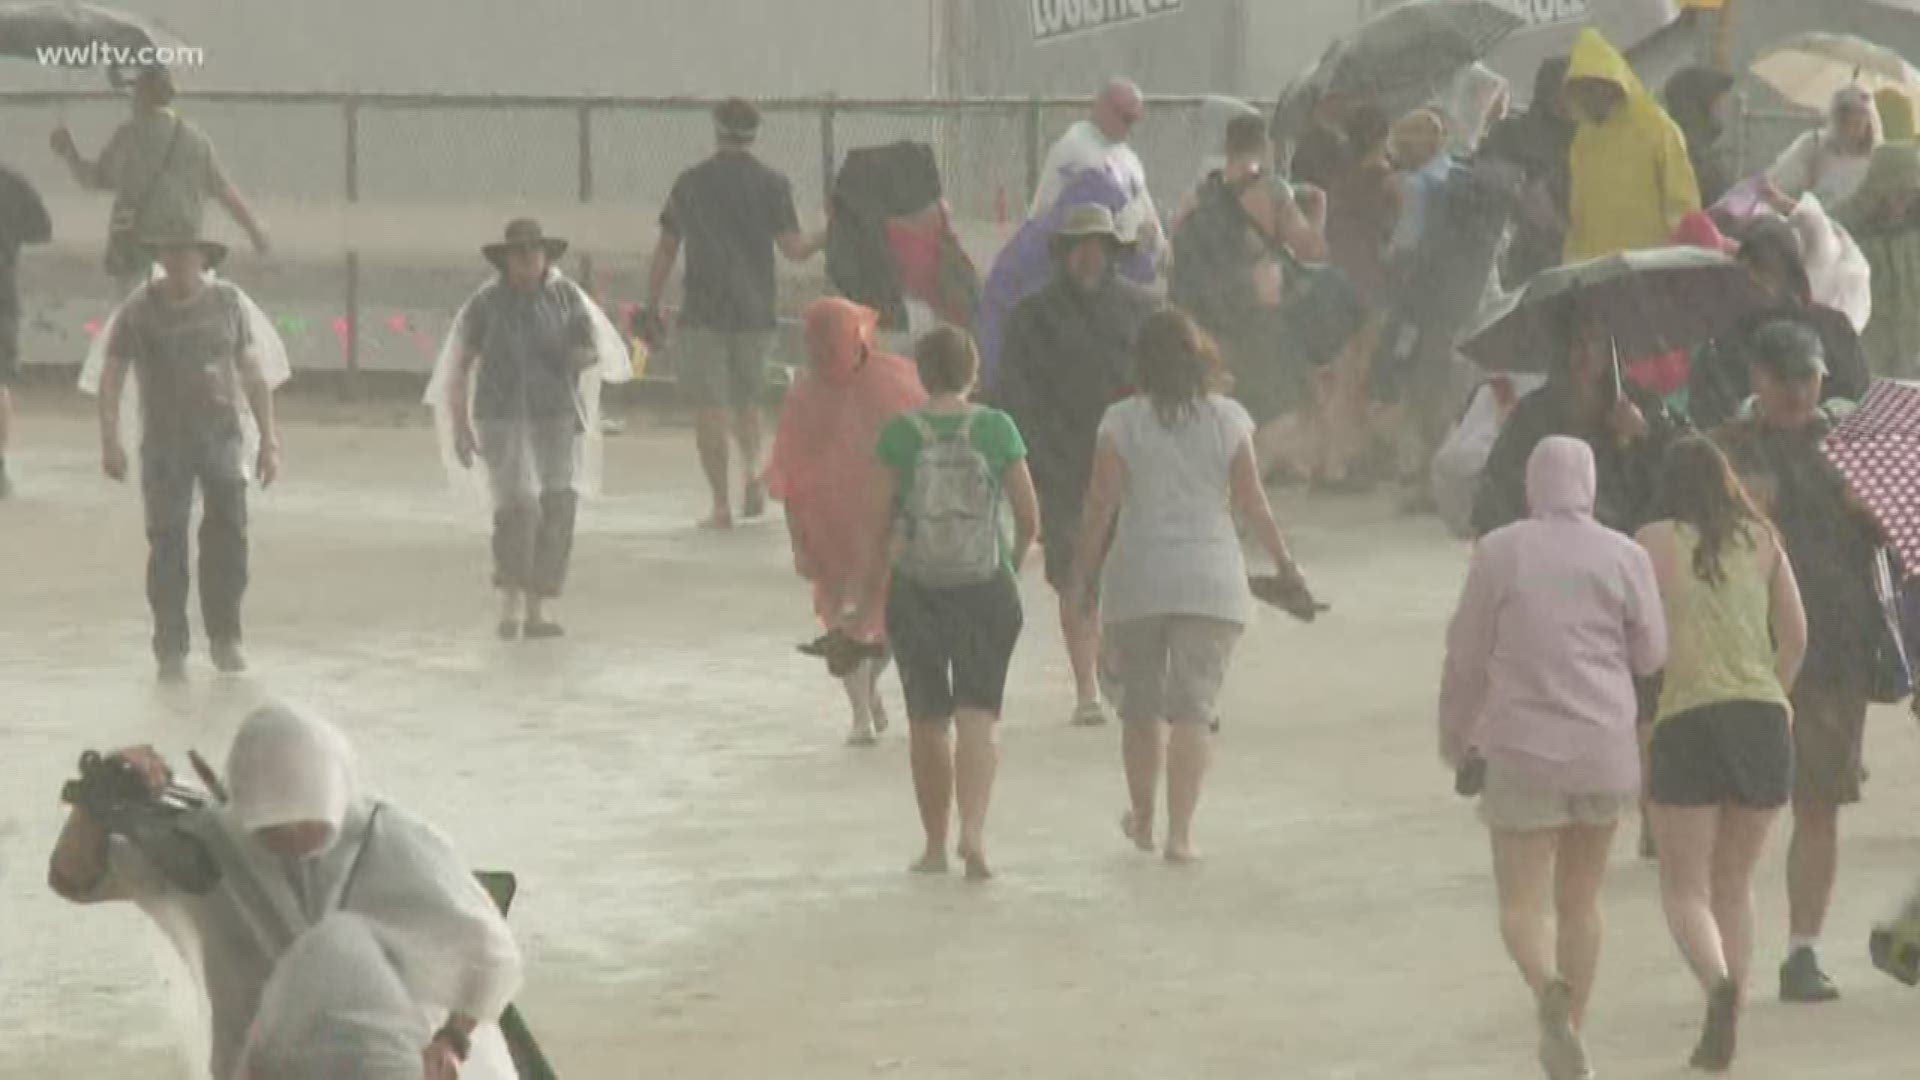 With heavy rain in the forecast for Thursday, Jazz Fest organizers say they've seen it before and they're ready.